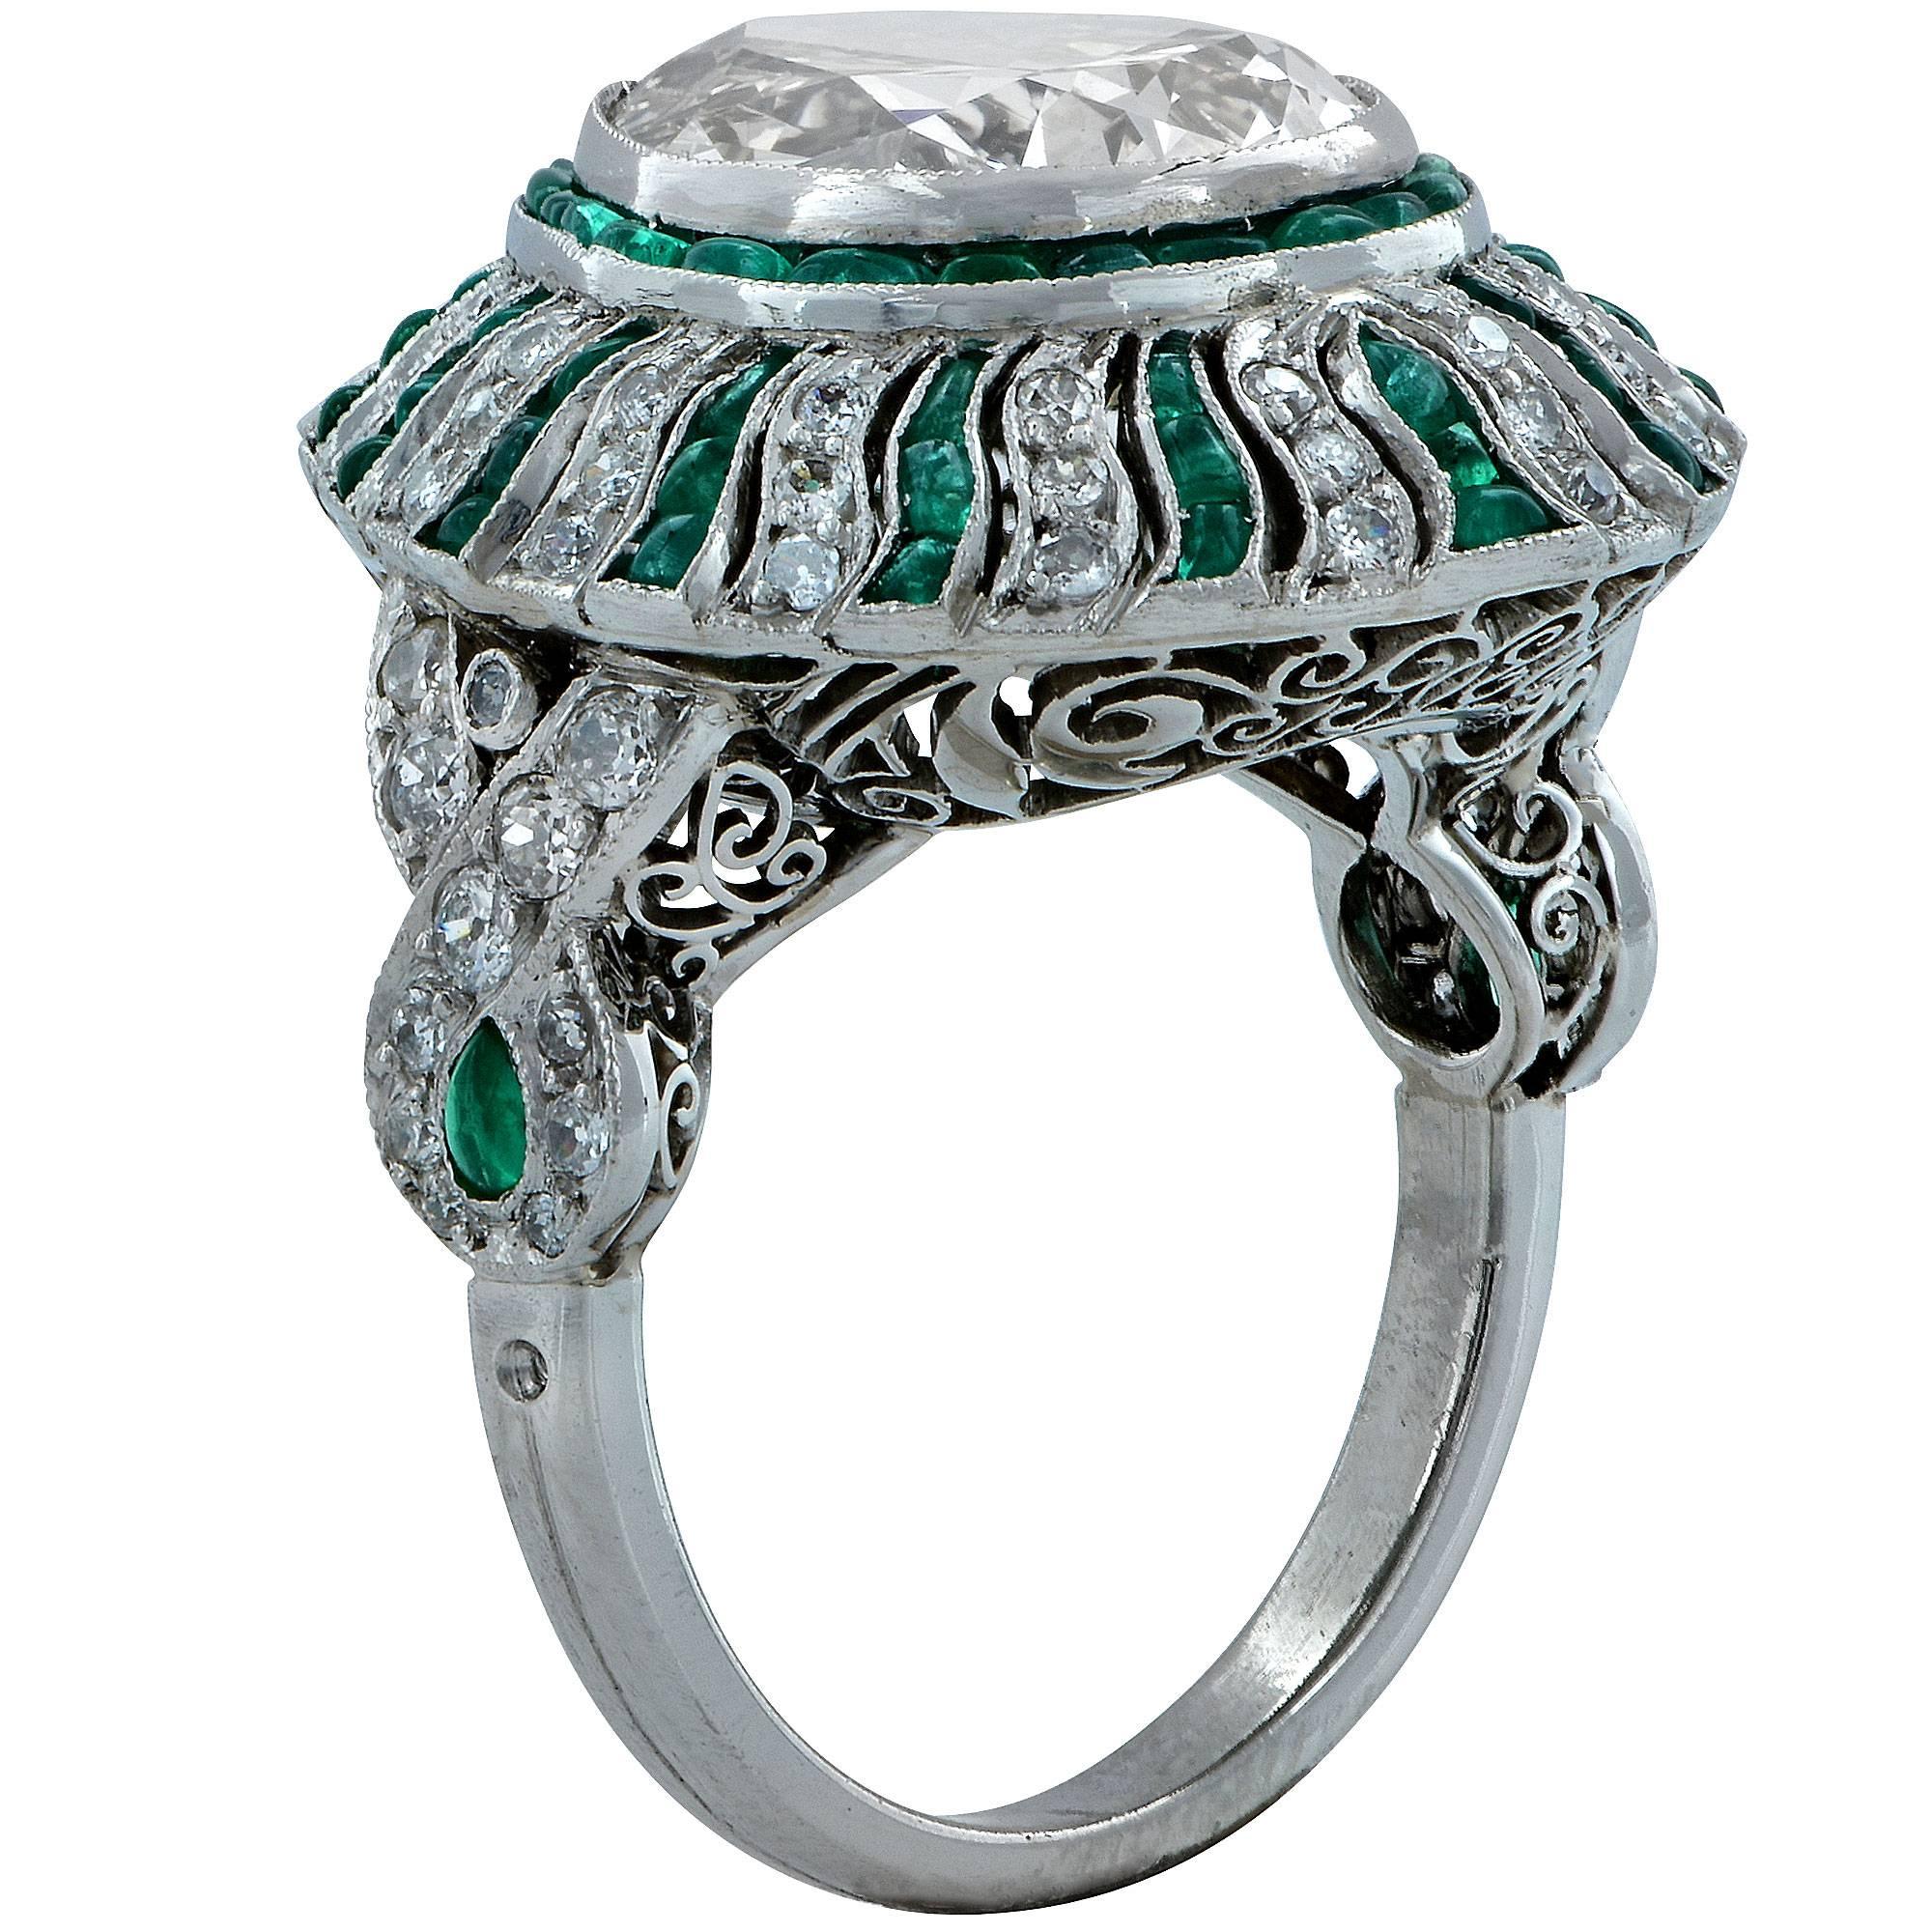 This beautiful handmade Art Deco style ring features a 5.09ct pear shape diamond K-L color VS1 clarity and is accented by .70cts of European cut diamonds and 2cts of emeralds to create a dazzling halo effect.

The ring is a size 6.25 and can be